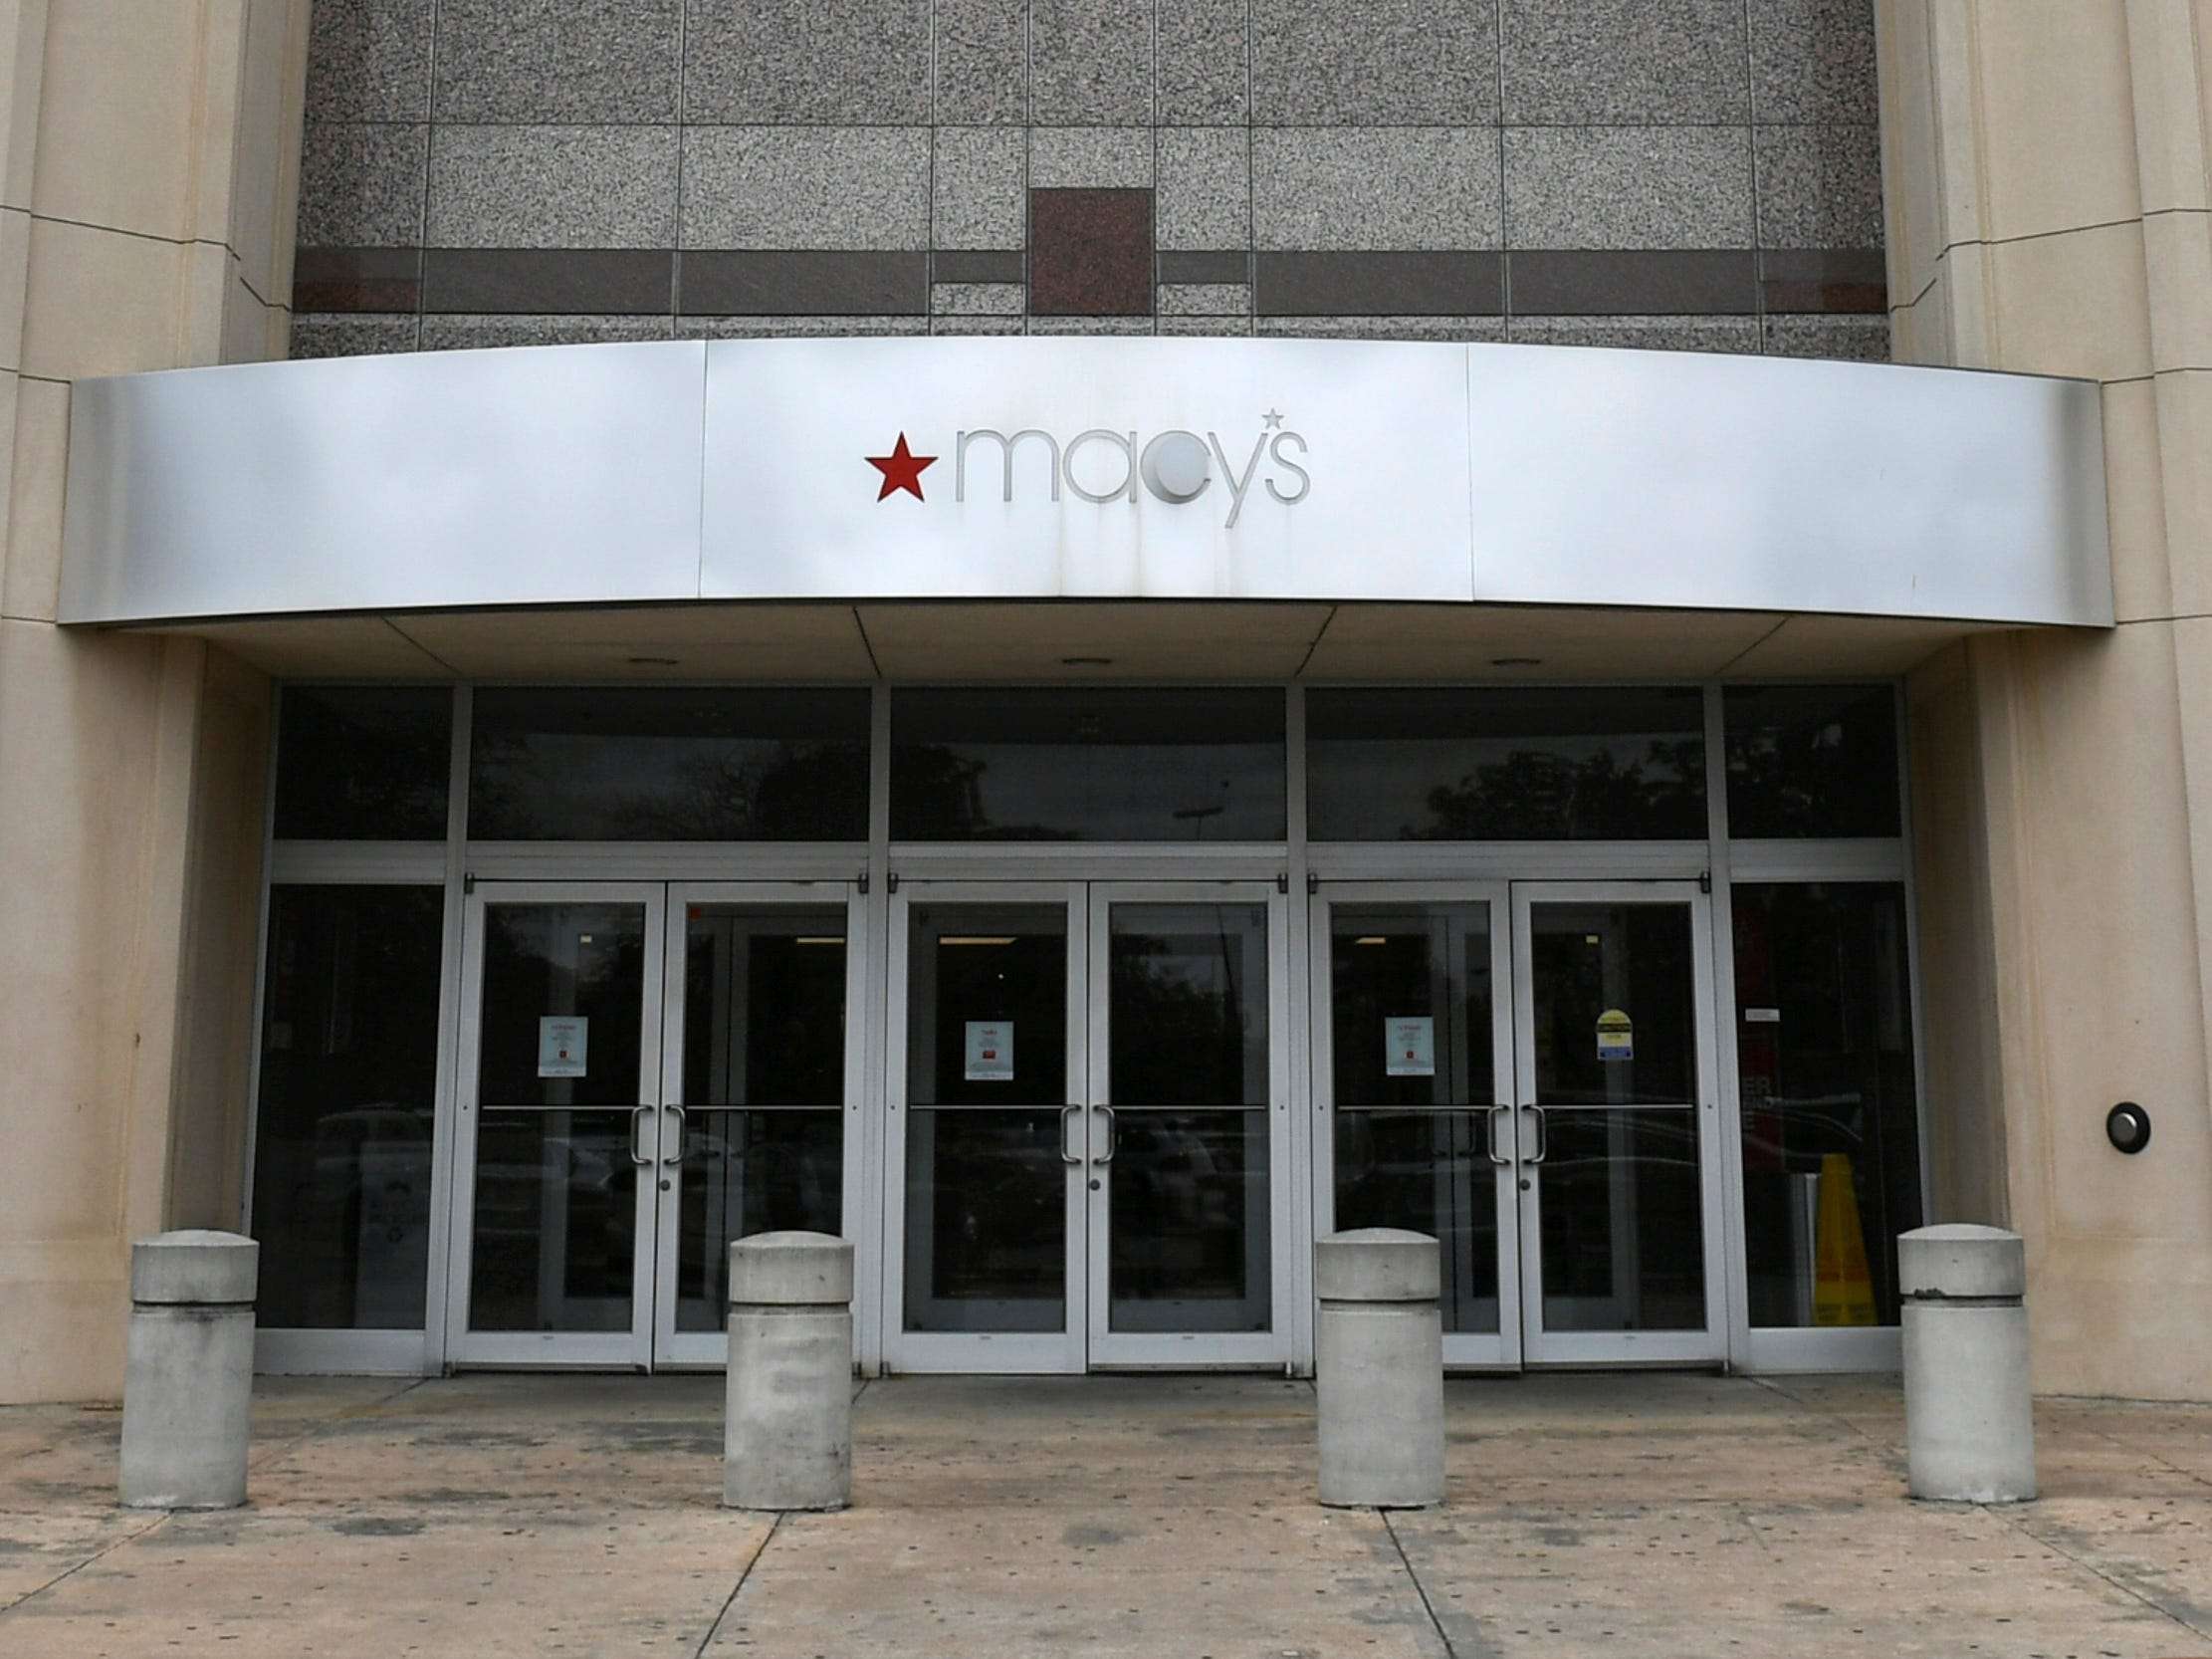 Macy's is closing 45 stores in 2021, and some have already started